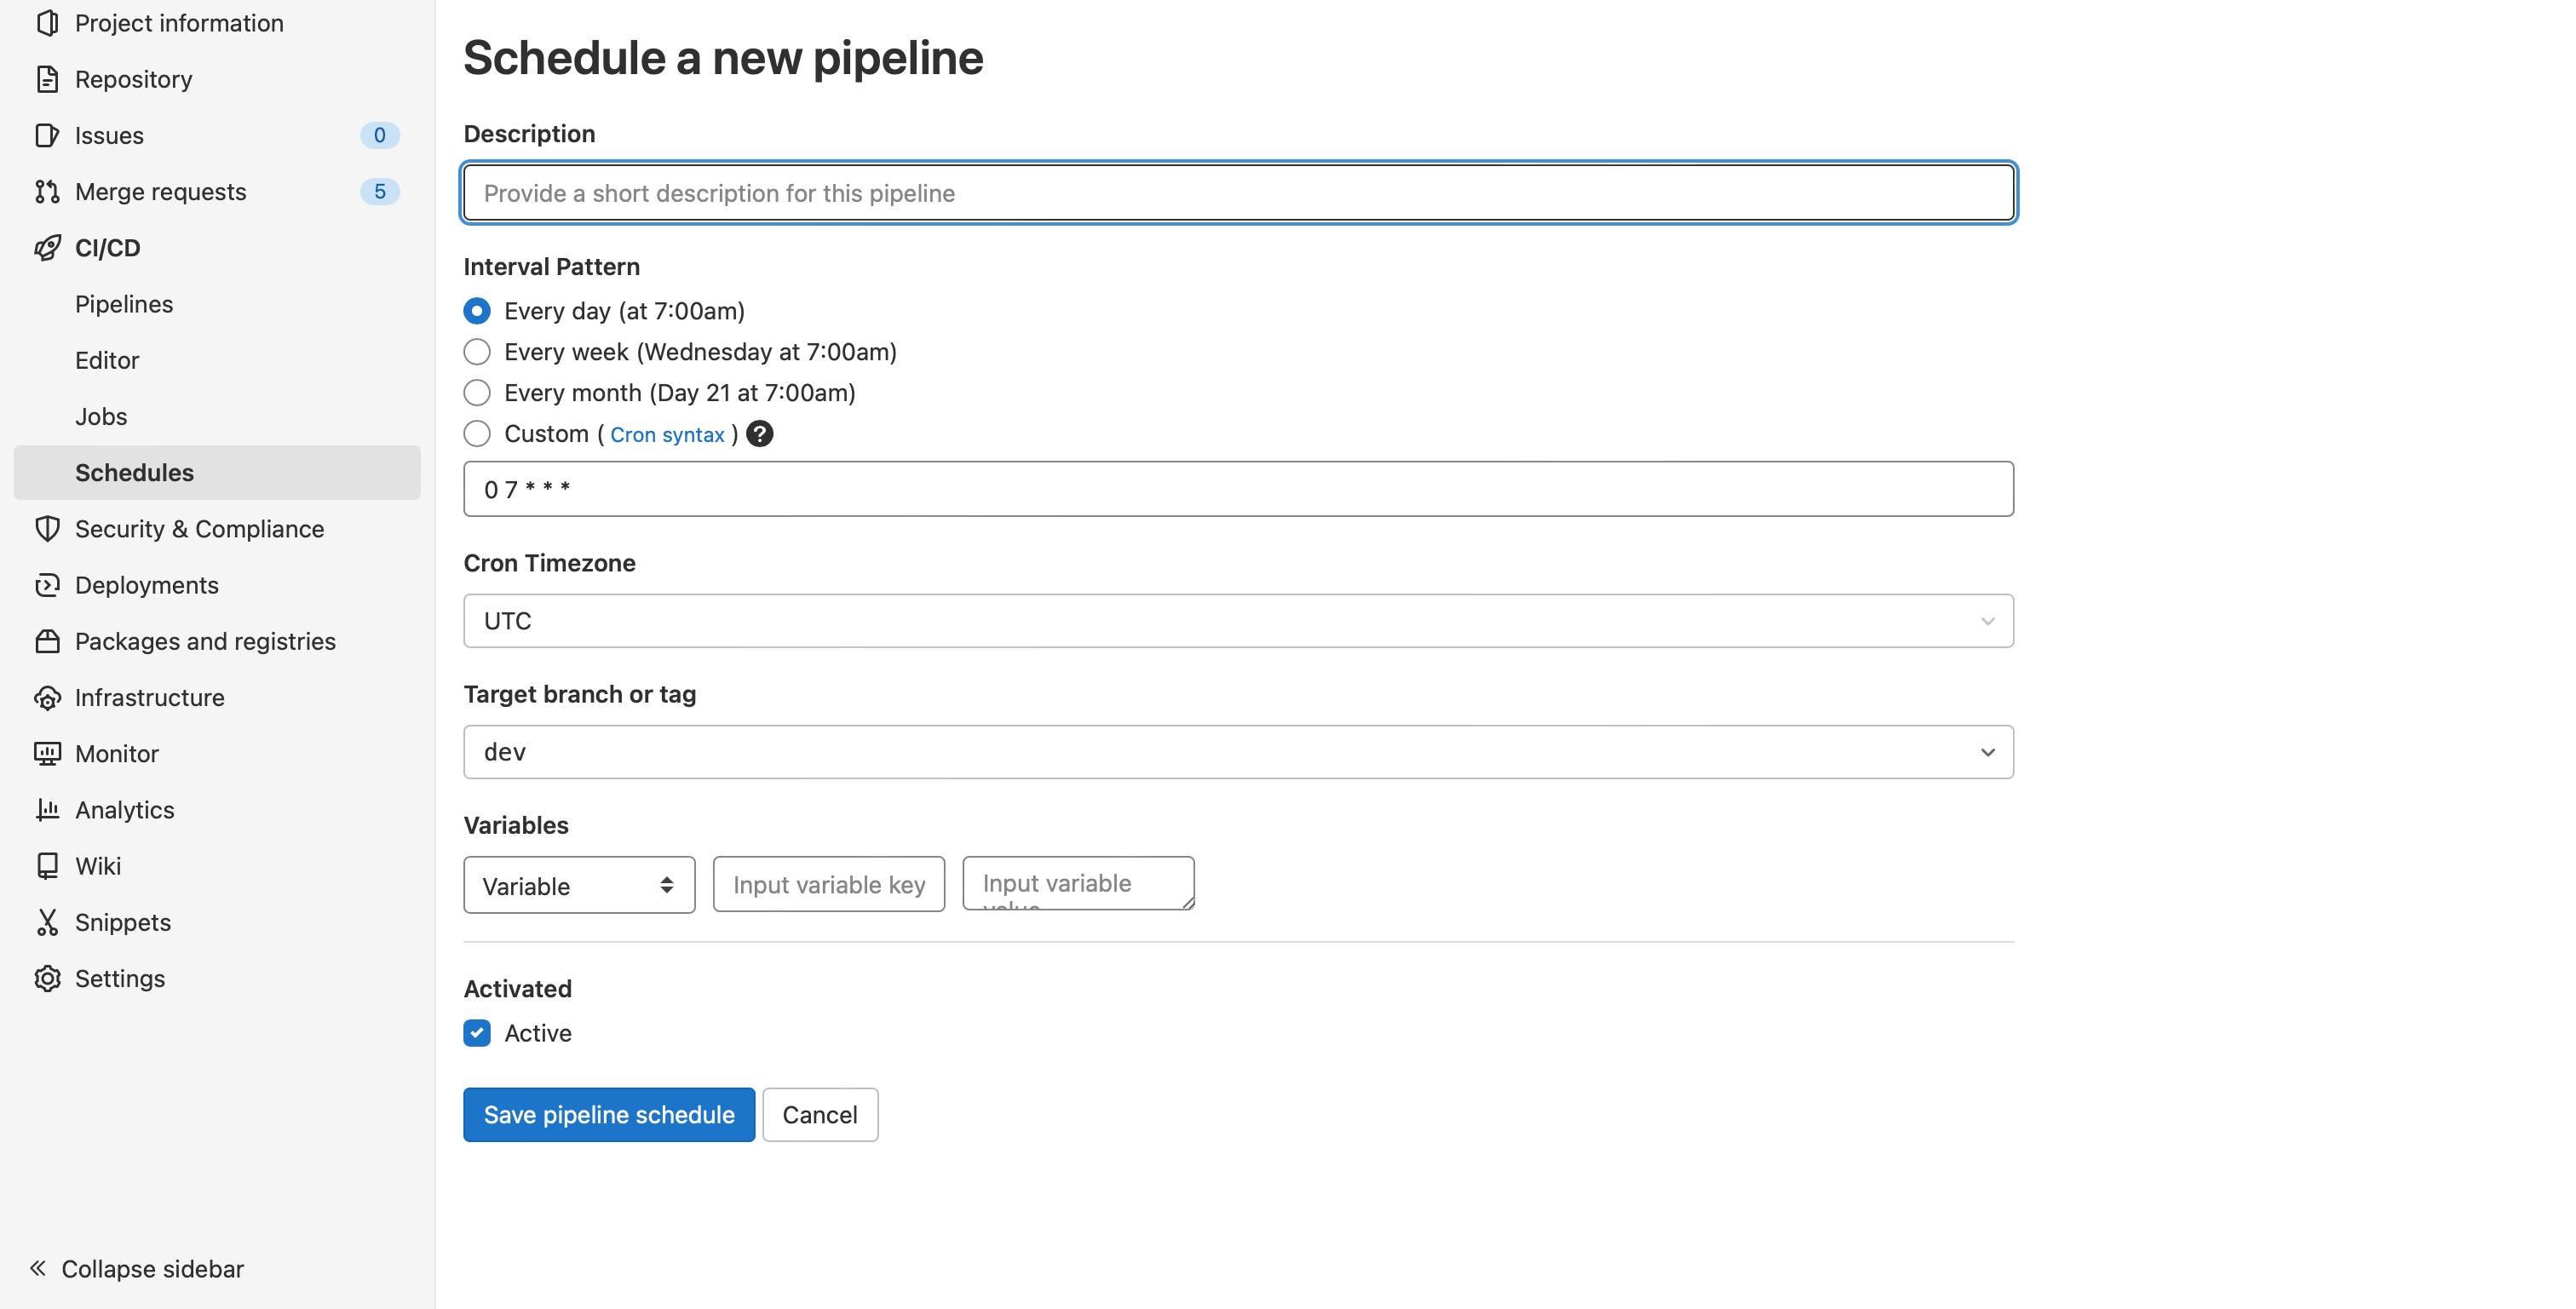 Schedule pipeline page